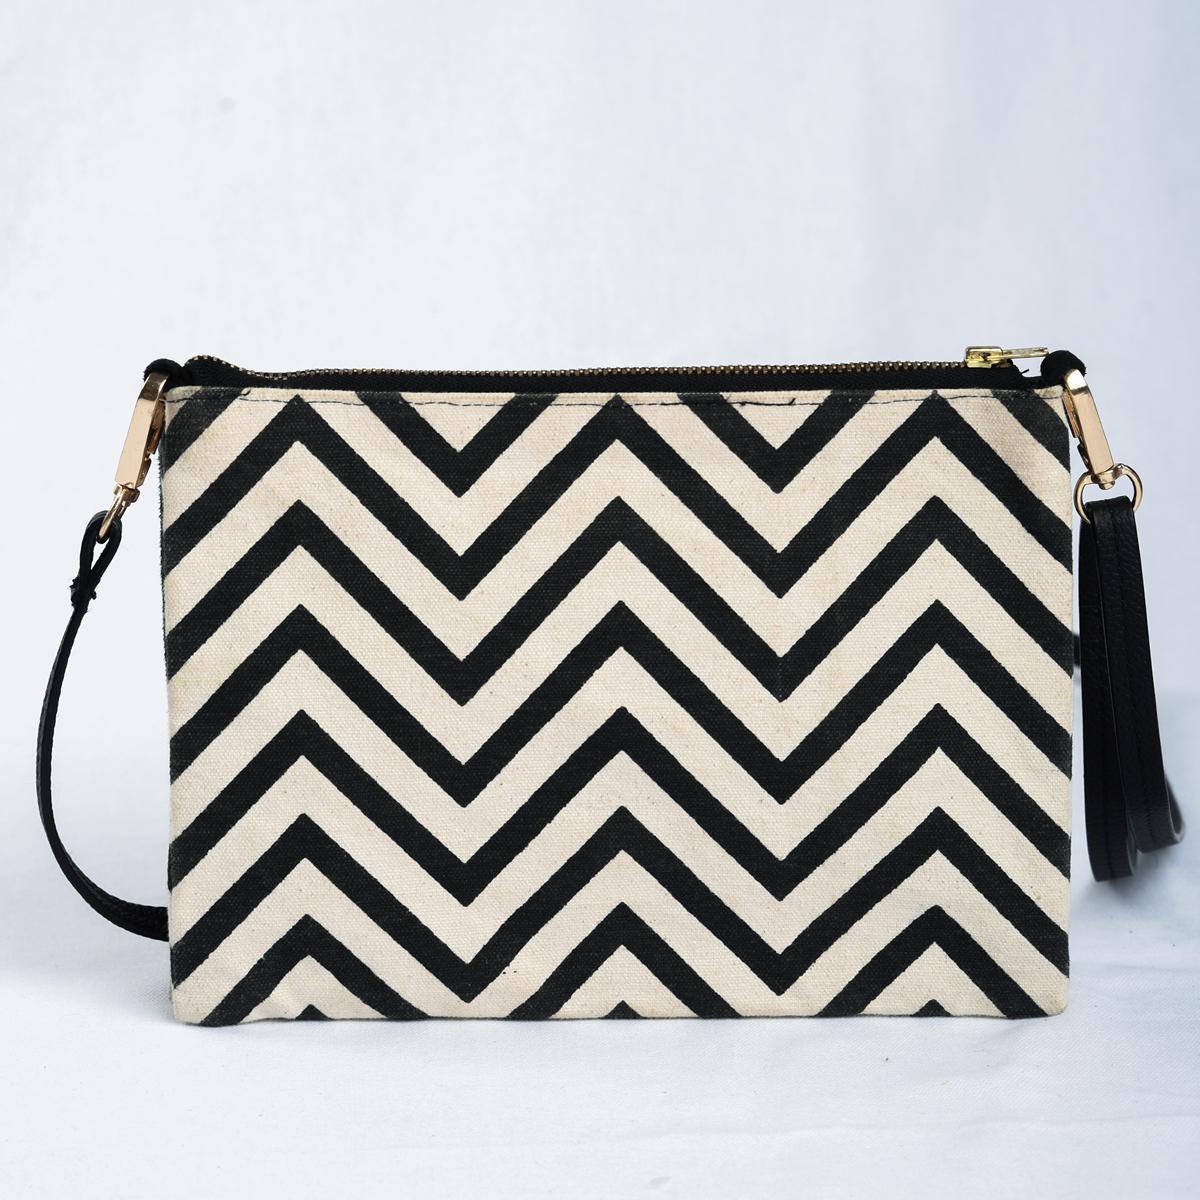 Sling bag, Chevron print canvas with black suede and pure leather handles